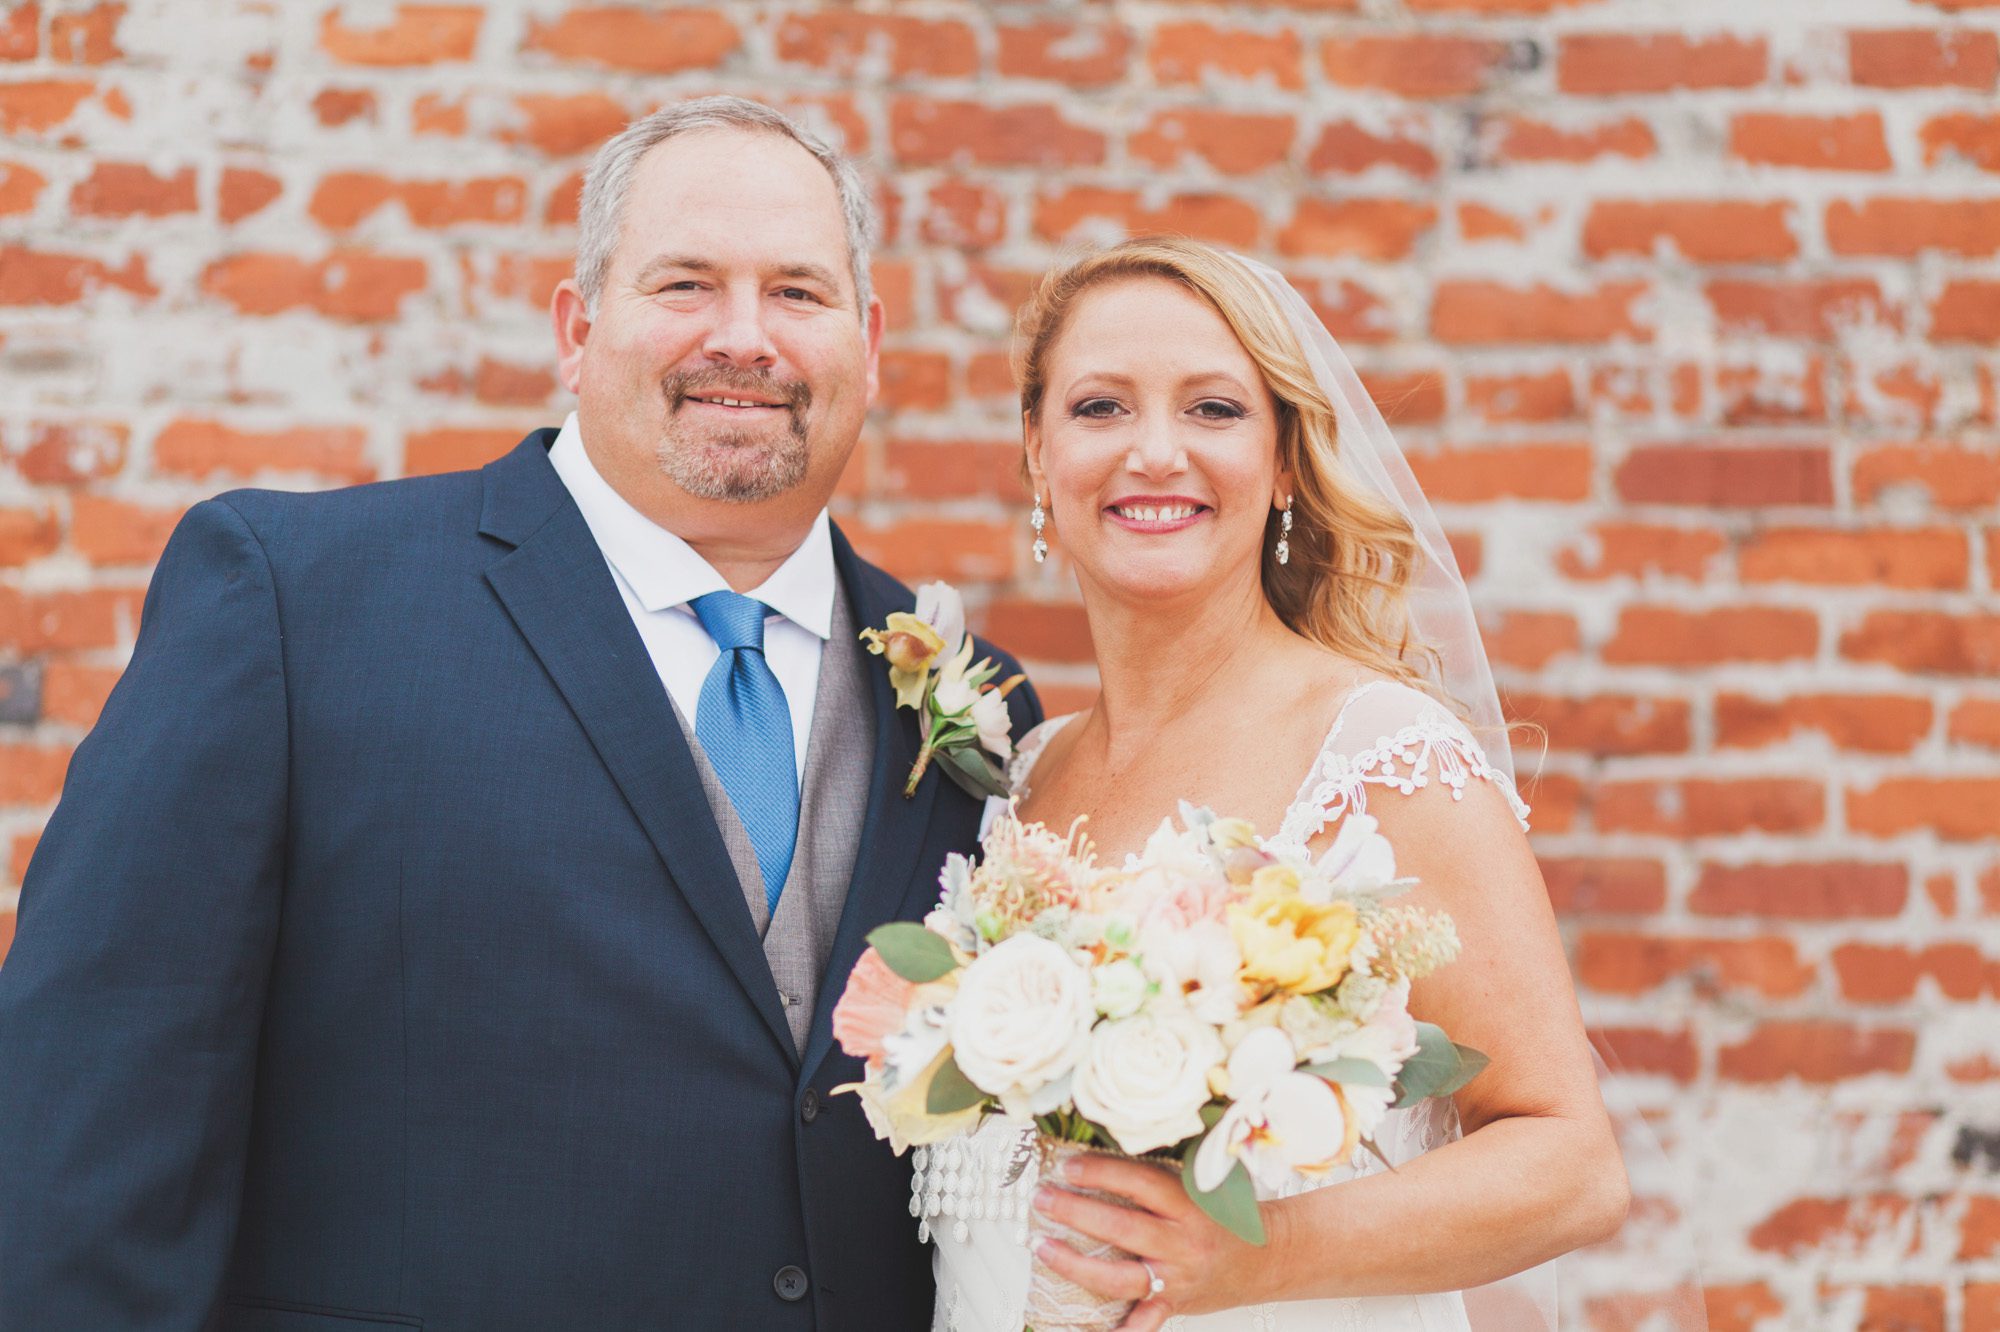 Bride and groom portrait before wedding ceremony  at Houston Station, Nashville TN. Photos by Krista Lee Photography.